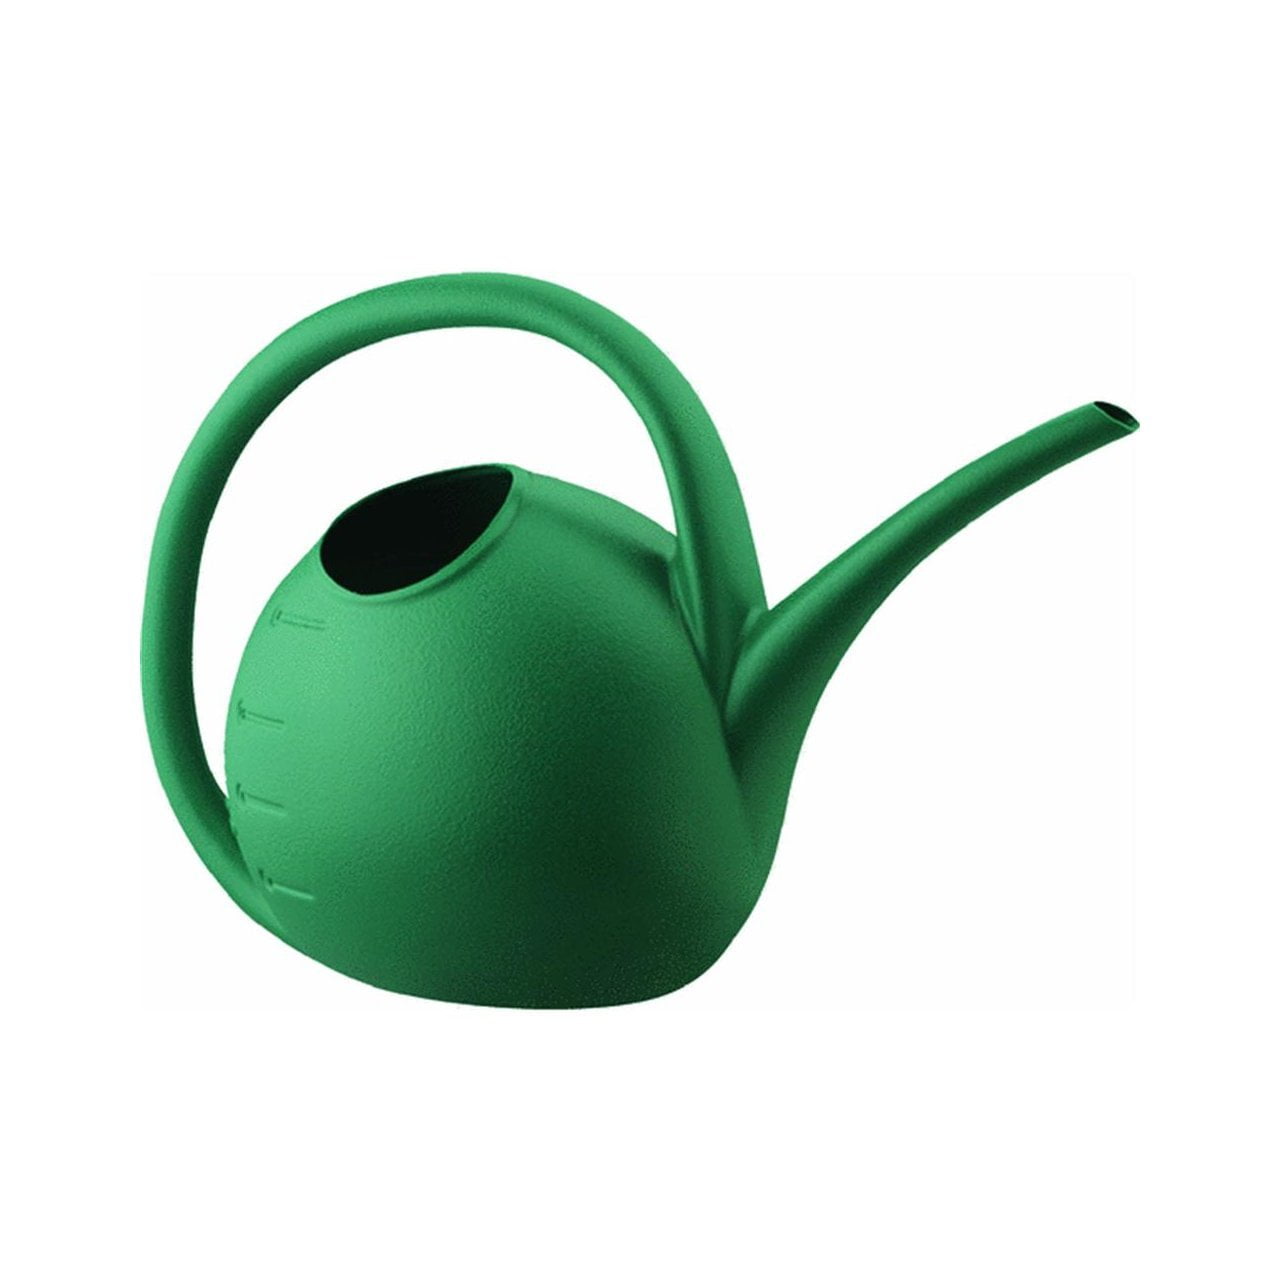 Watering Can RZ.WC2G0E35 The HC Companies 2 Gallon Plastic Watering Cans for Outdoor & Indoor Plants Clay